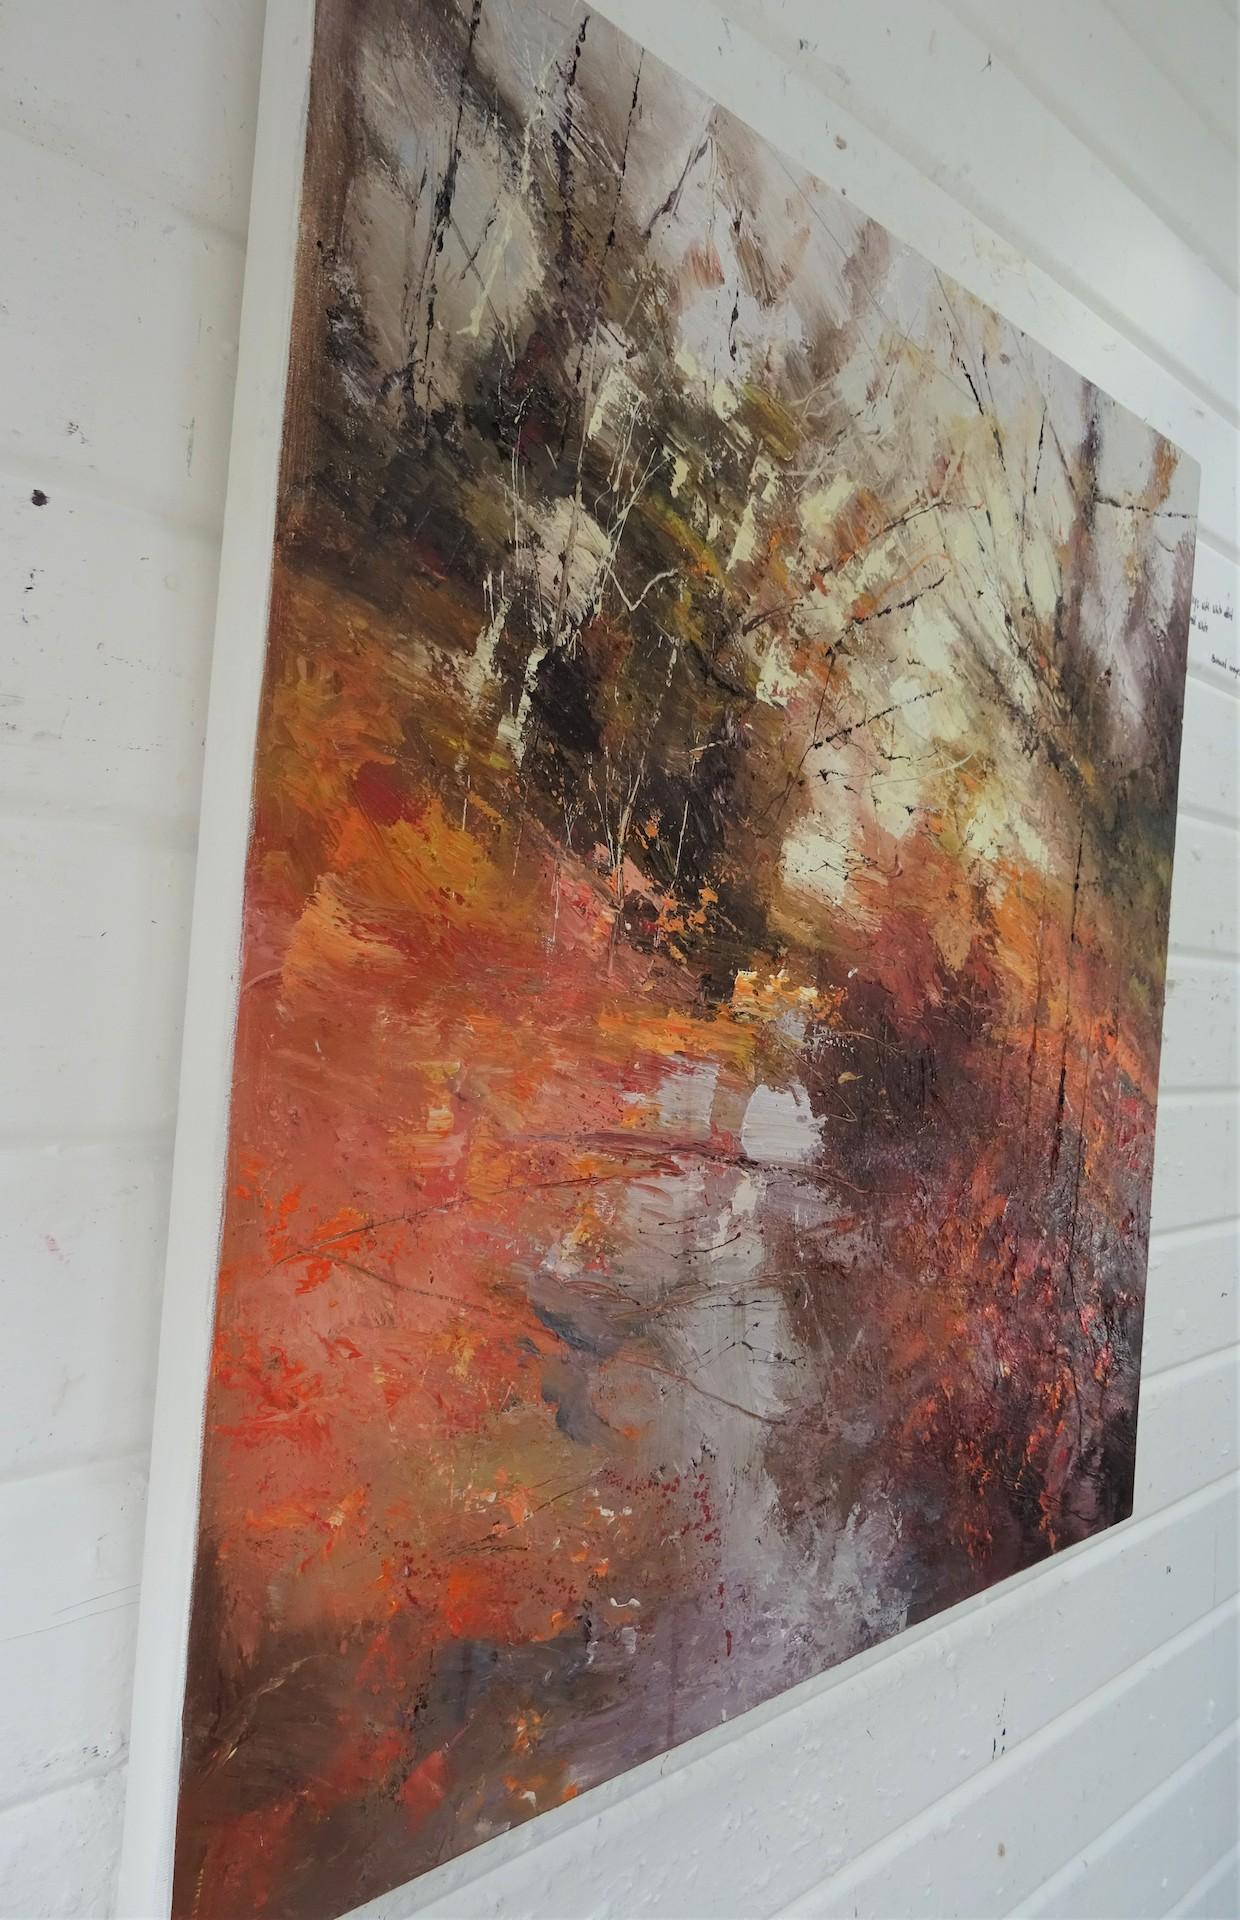 Claire Wiltsher
Please note that in situ images are purely an indication of how a piece may look.

Sunrise Reception is an original painting by Claire Wiltsher. The thick texture of the paint coupled with the bold, bright colours make for an